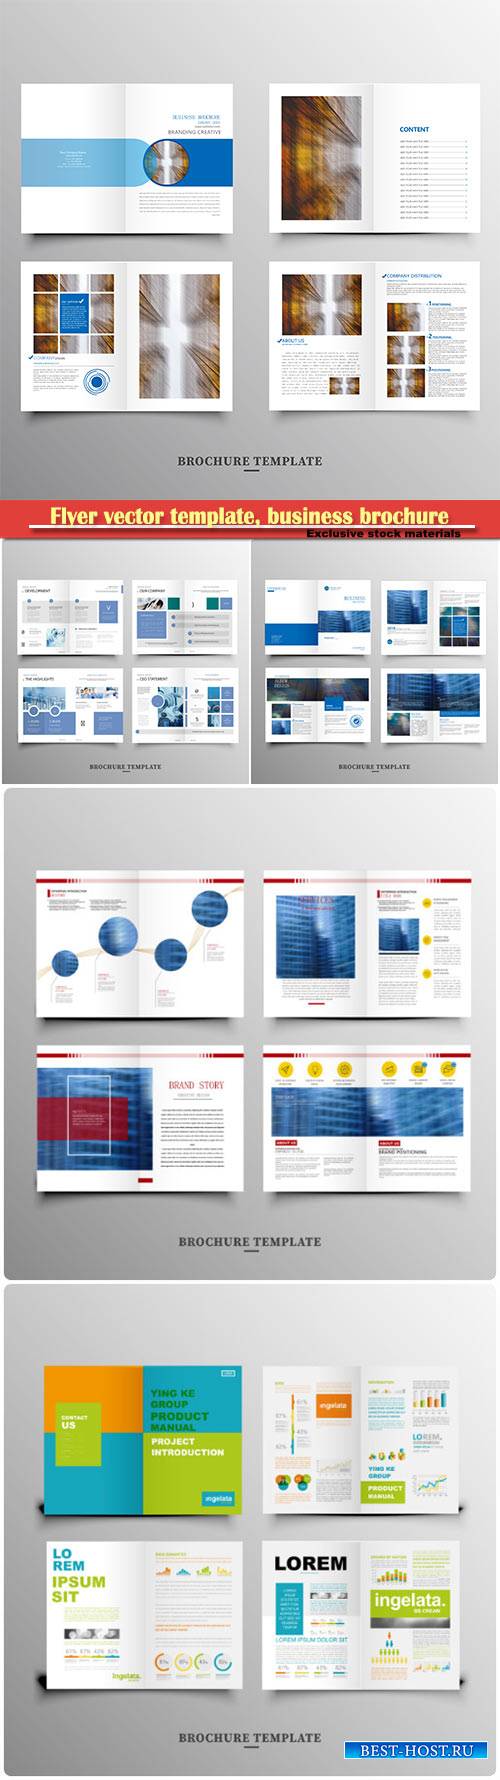 Flyer vector template, business brochure, magazine cover # 23